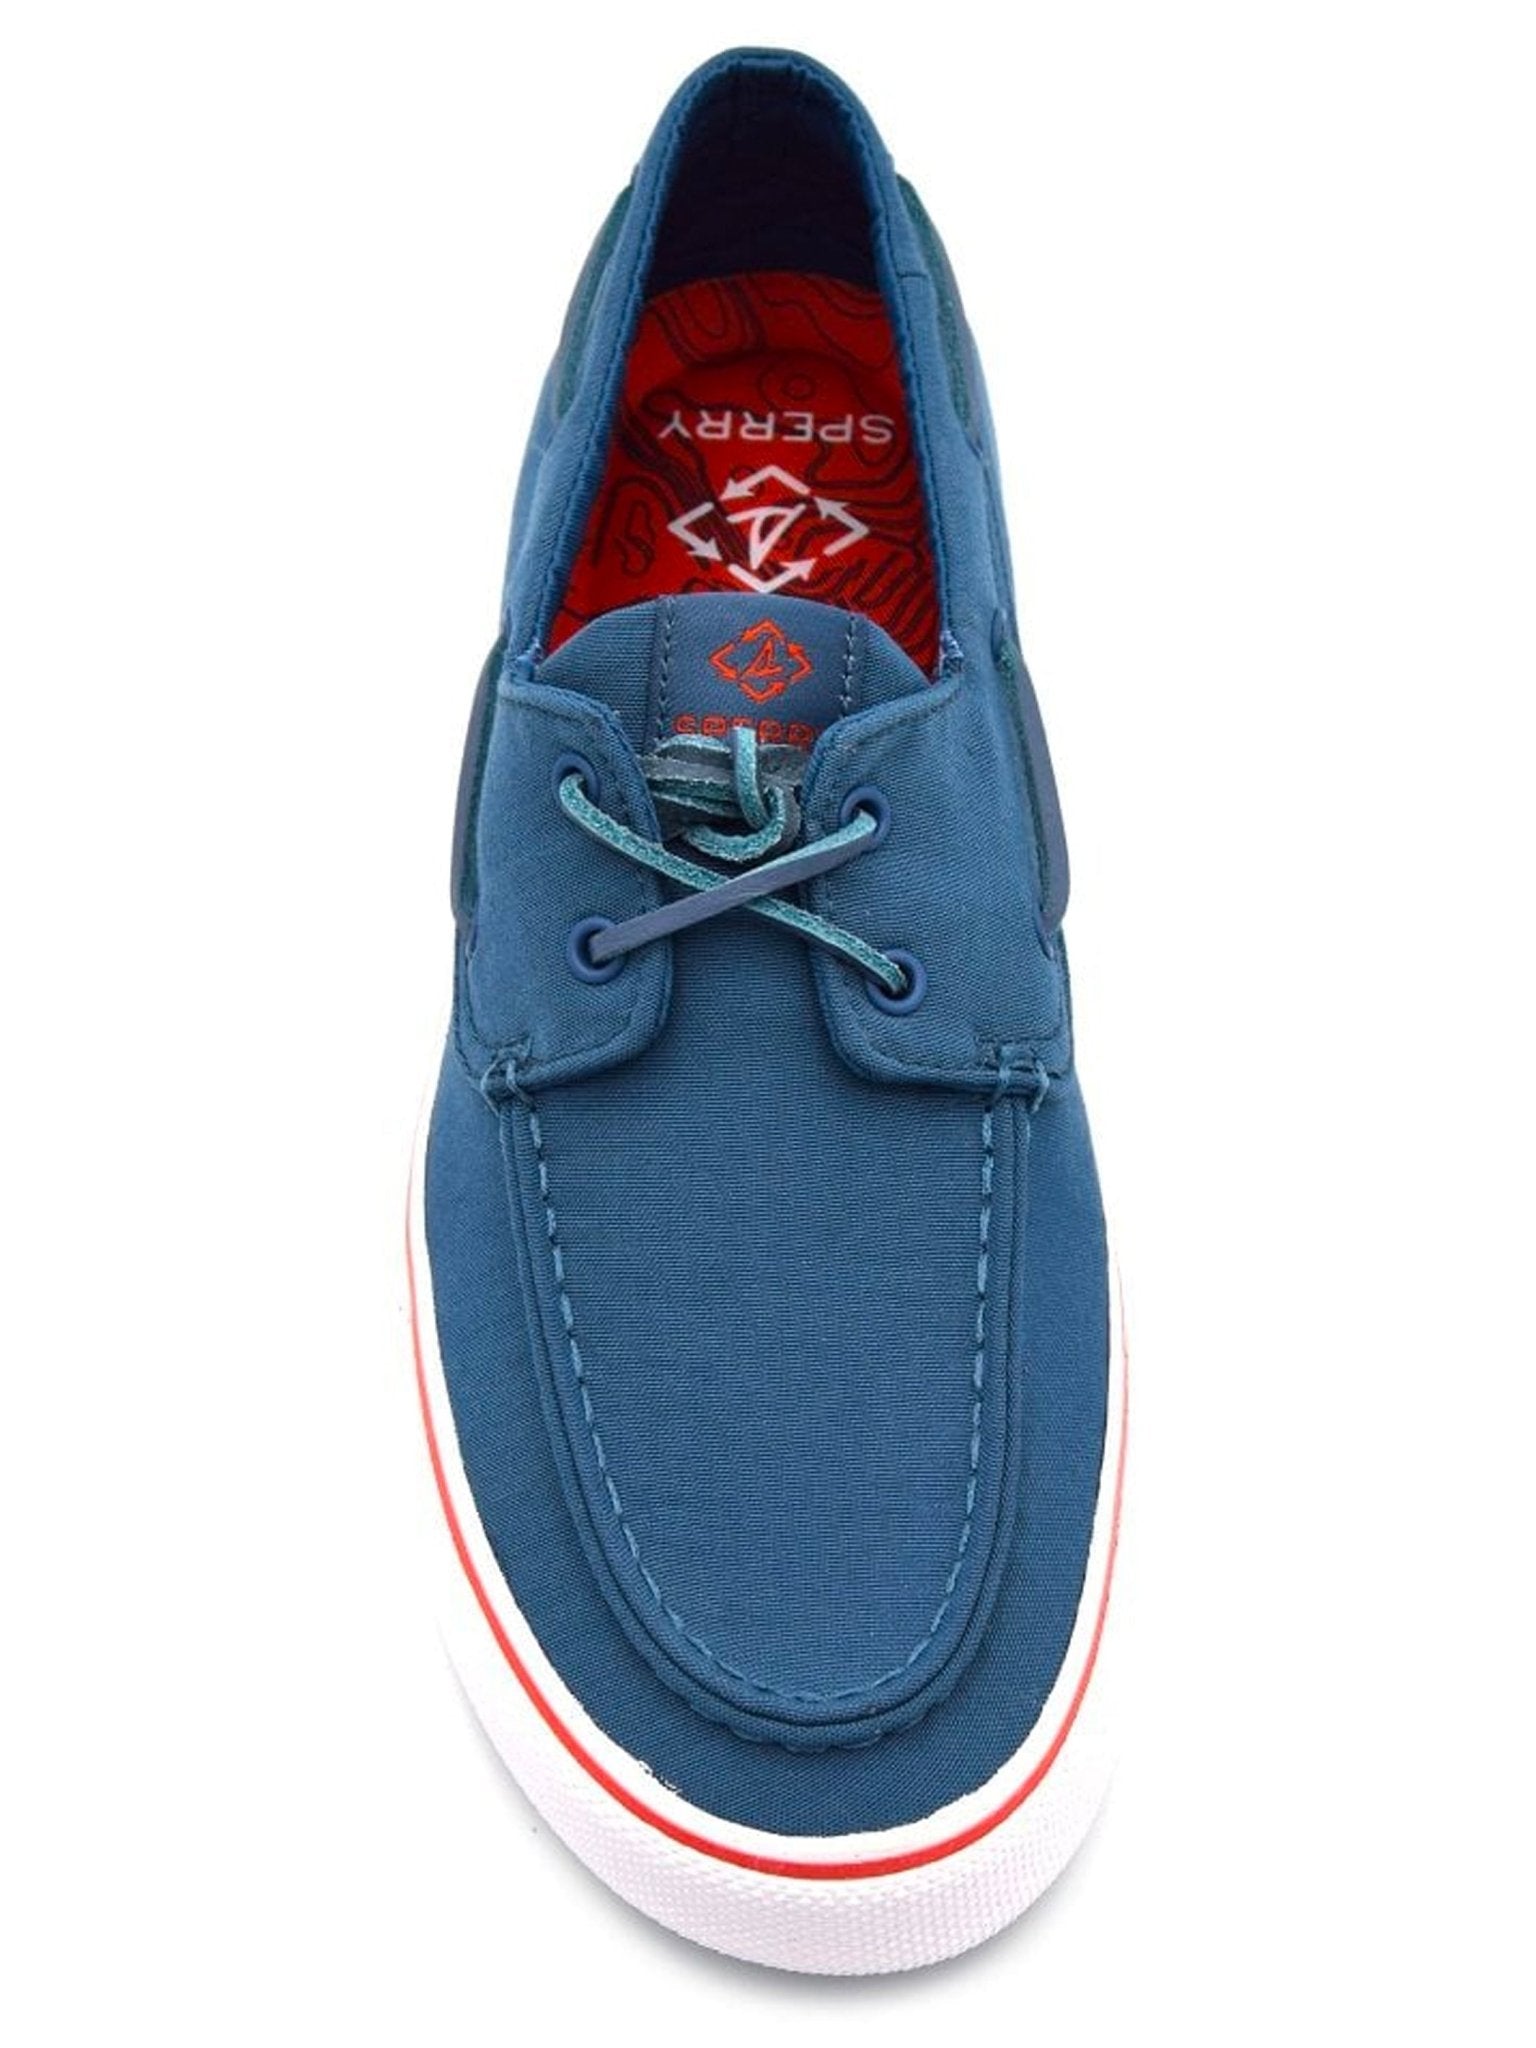 Sperry Sperry - Bahamas Seacycled Mens Boat Shoe / Sperry Deck shoe Shoes